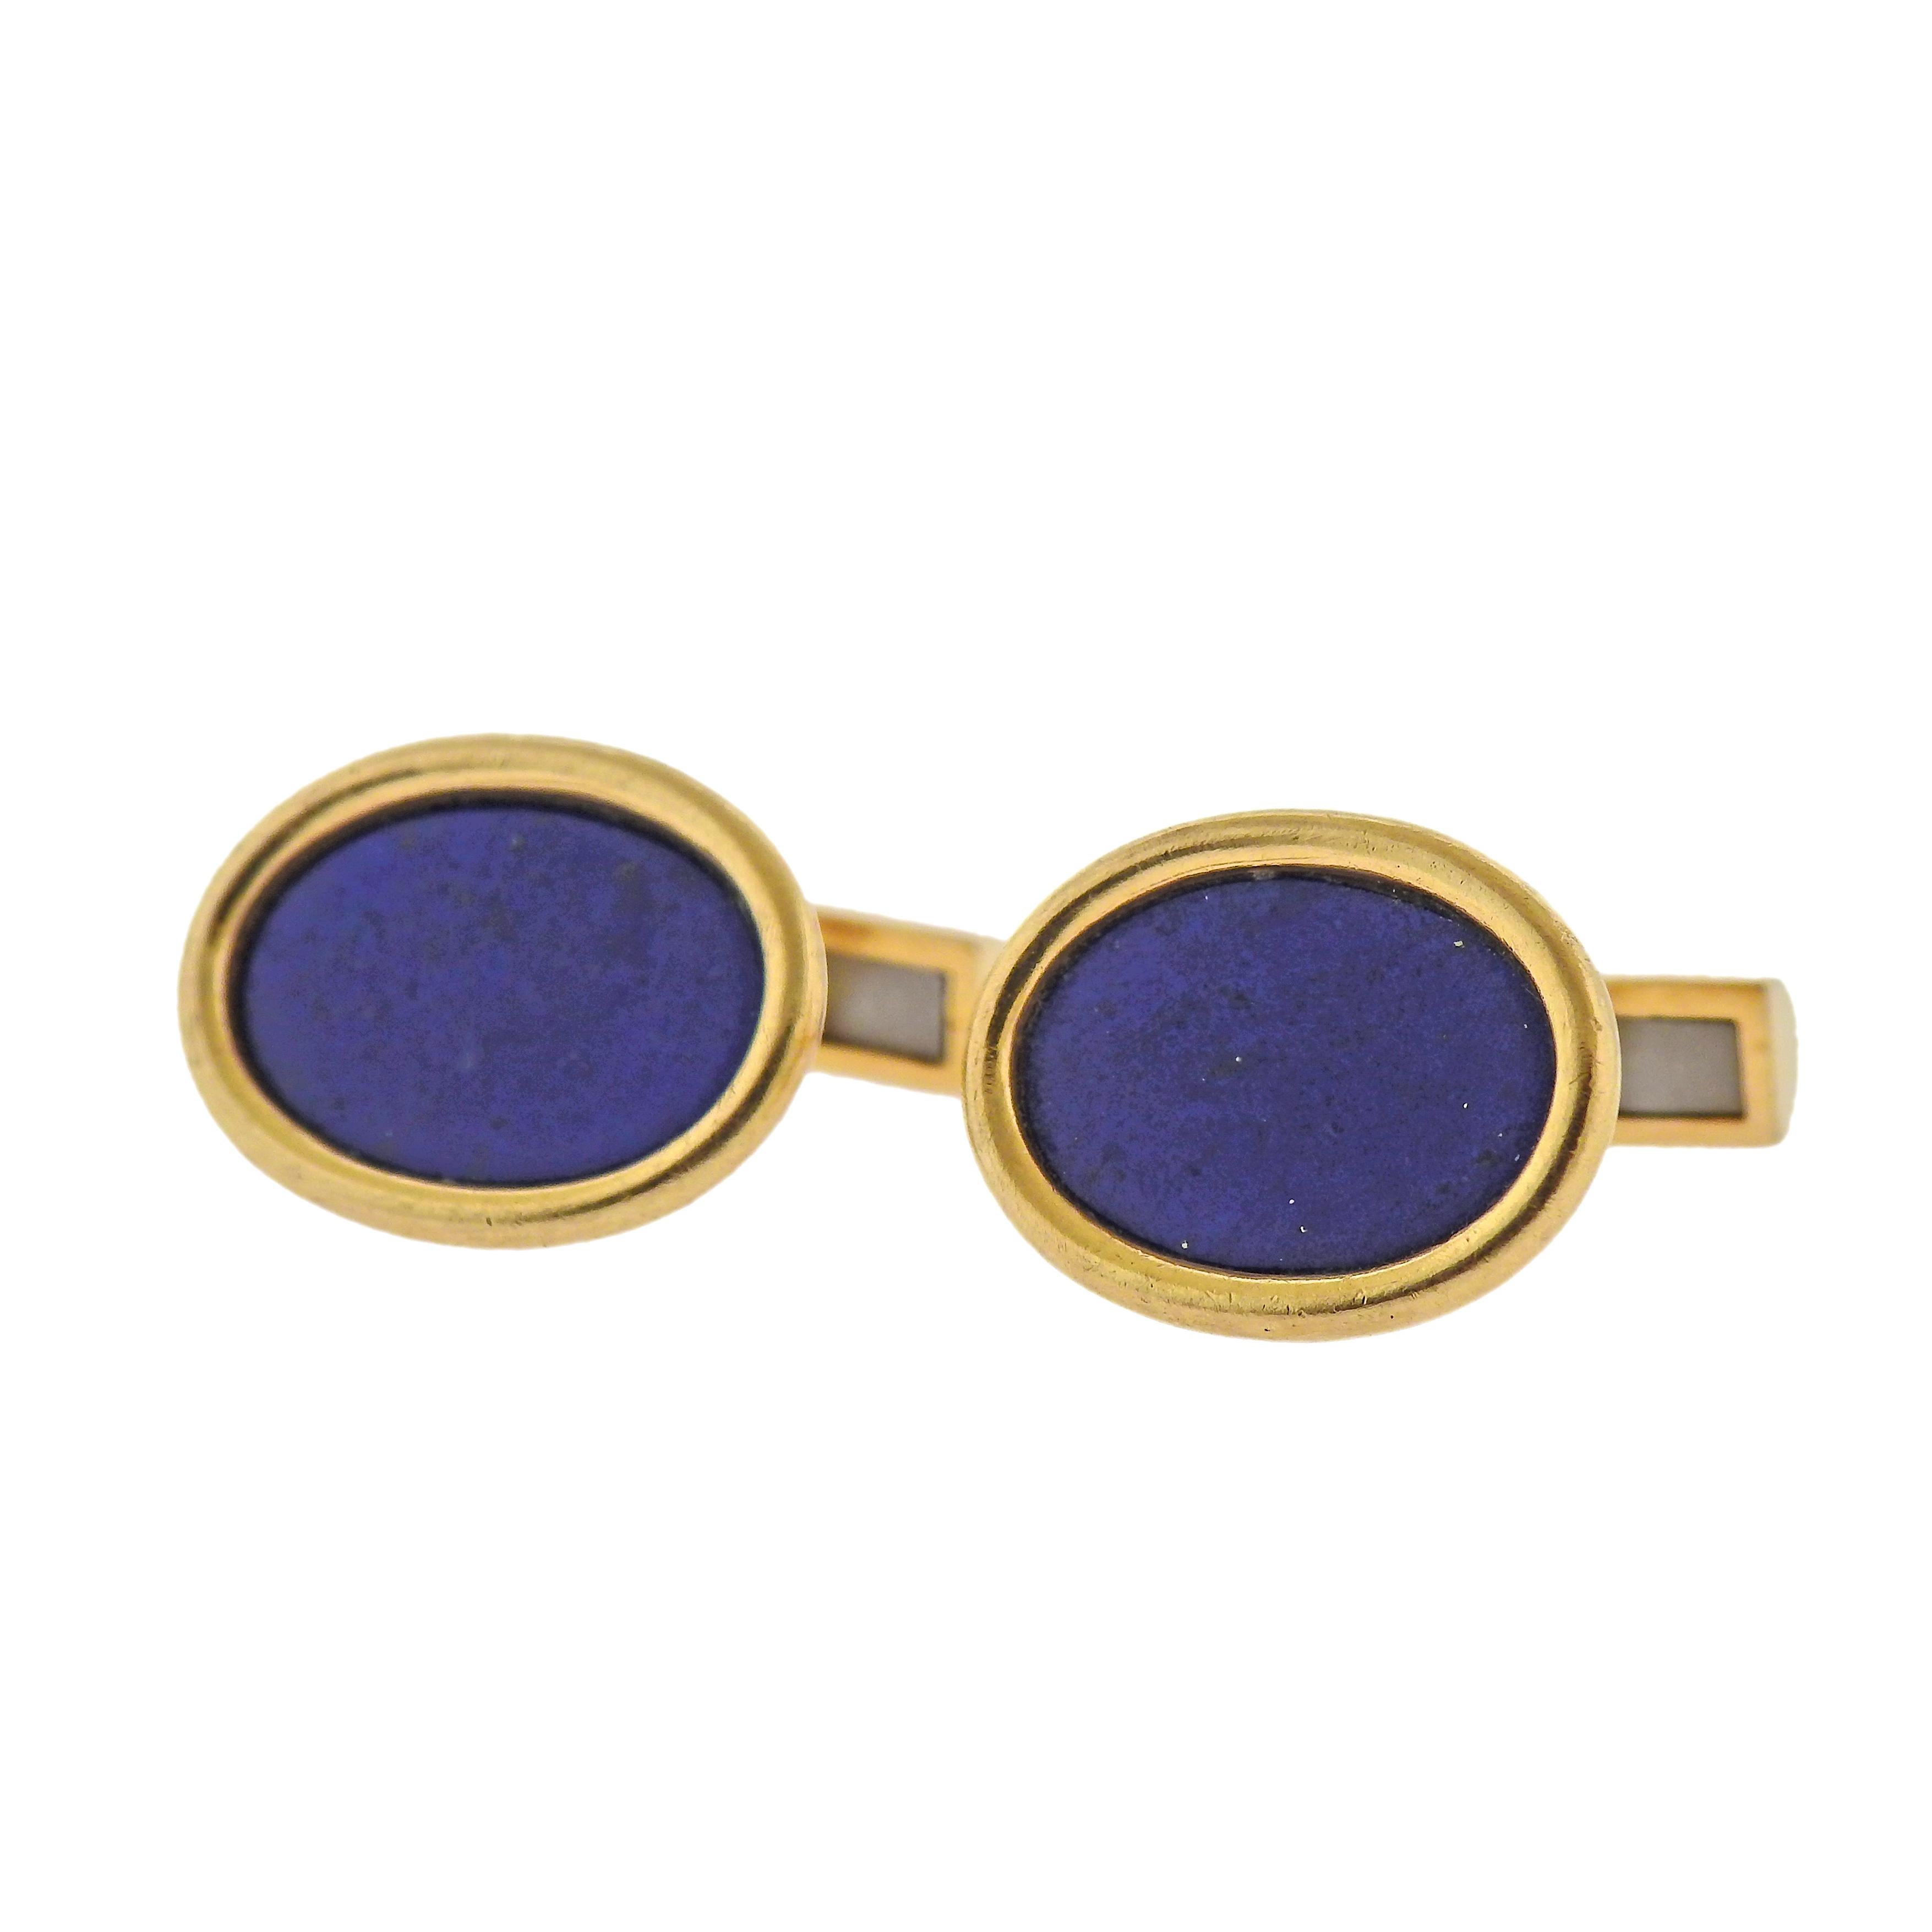 Pair of vintage 14k gold cufflinks with oval lapis.   Cufflink top is 18mm x 15mm. Marked: 14k, ABL. Weight - 11.6 grams. 